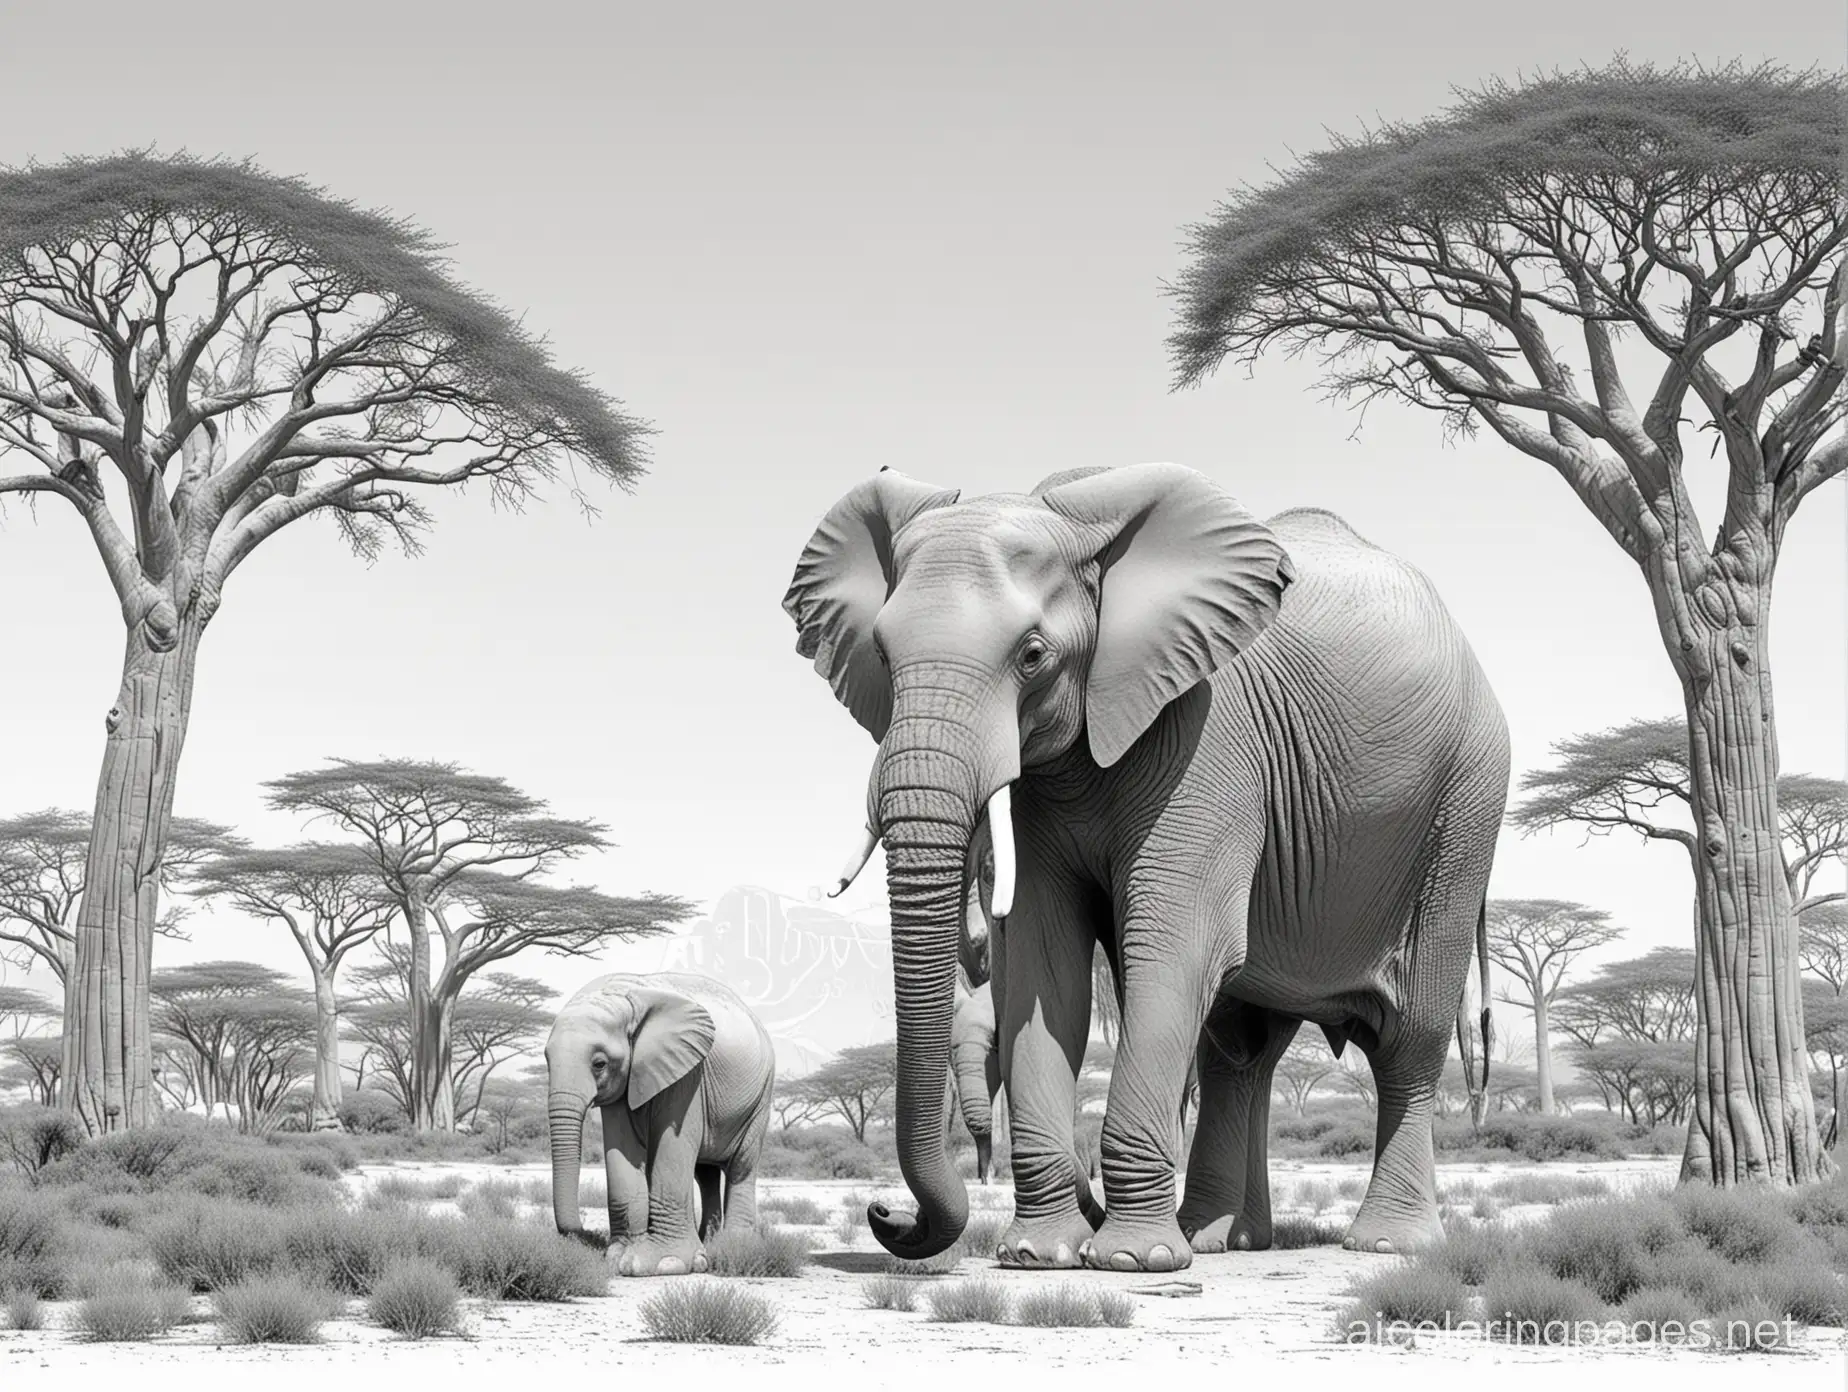 Elephant and two emperor penguins standing among baobab and acacia trees and short grasses, Coloring Page, black and white, line art, white background, Simplicity, Ample White Space. The background of the coloring page is plain white to make it easy for young children to color within the lines. The outlines of all the subjects are easy to distinguish, making it simple for kids to color without too much difficulty